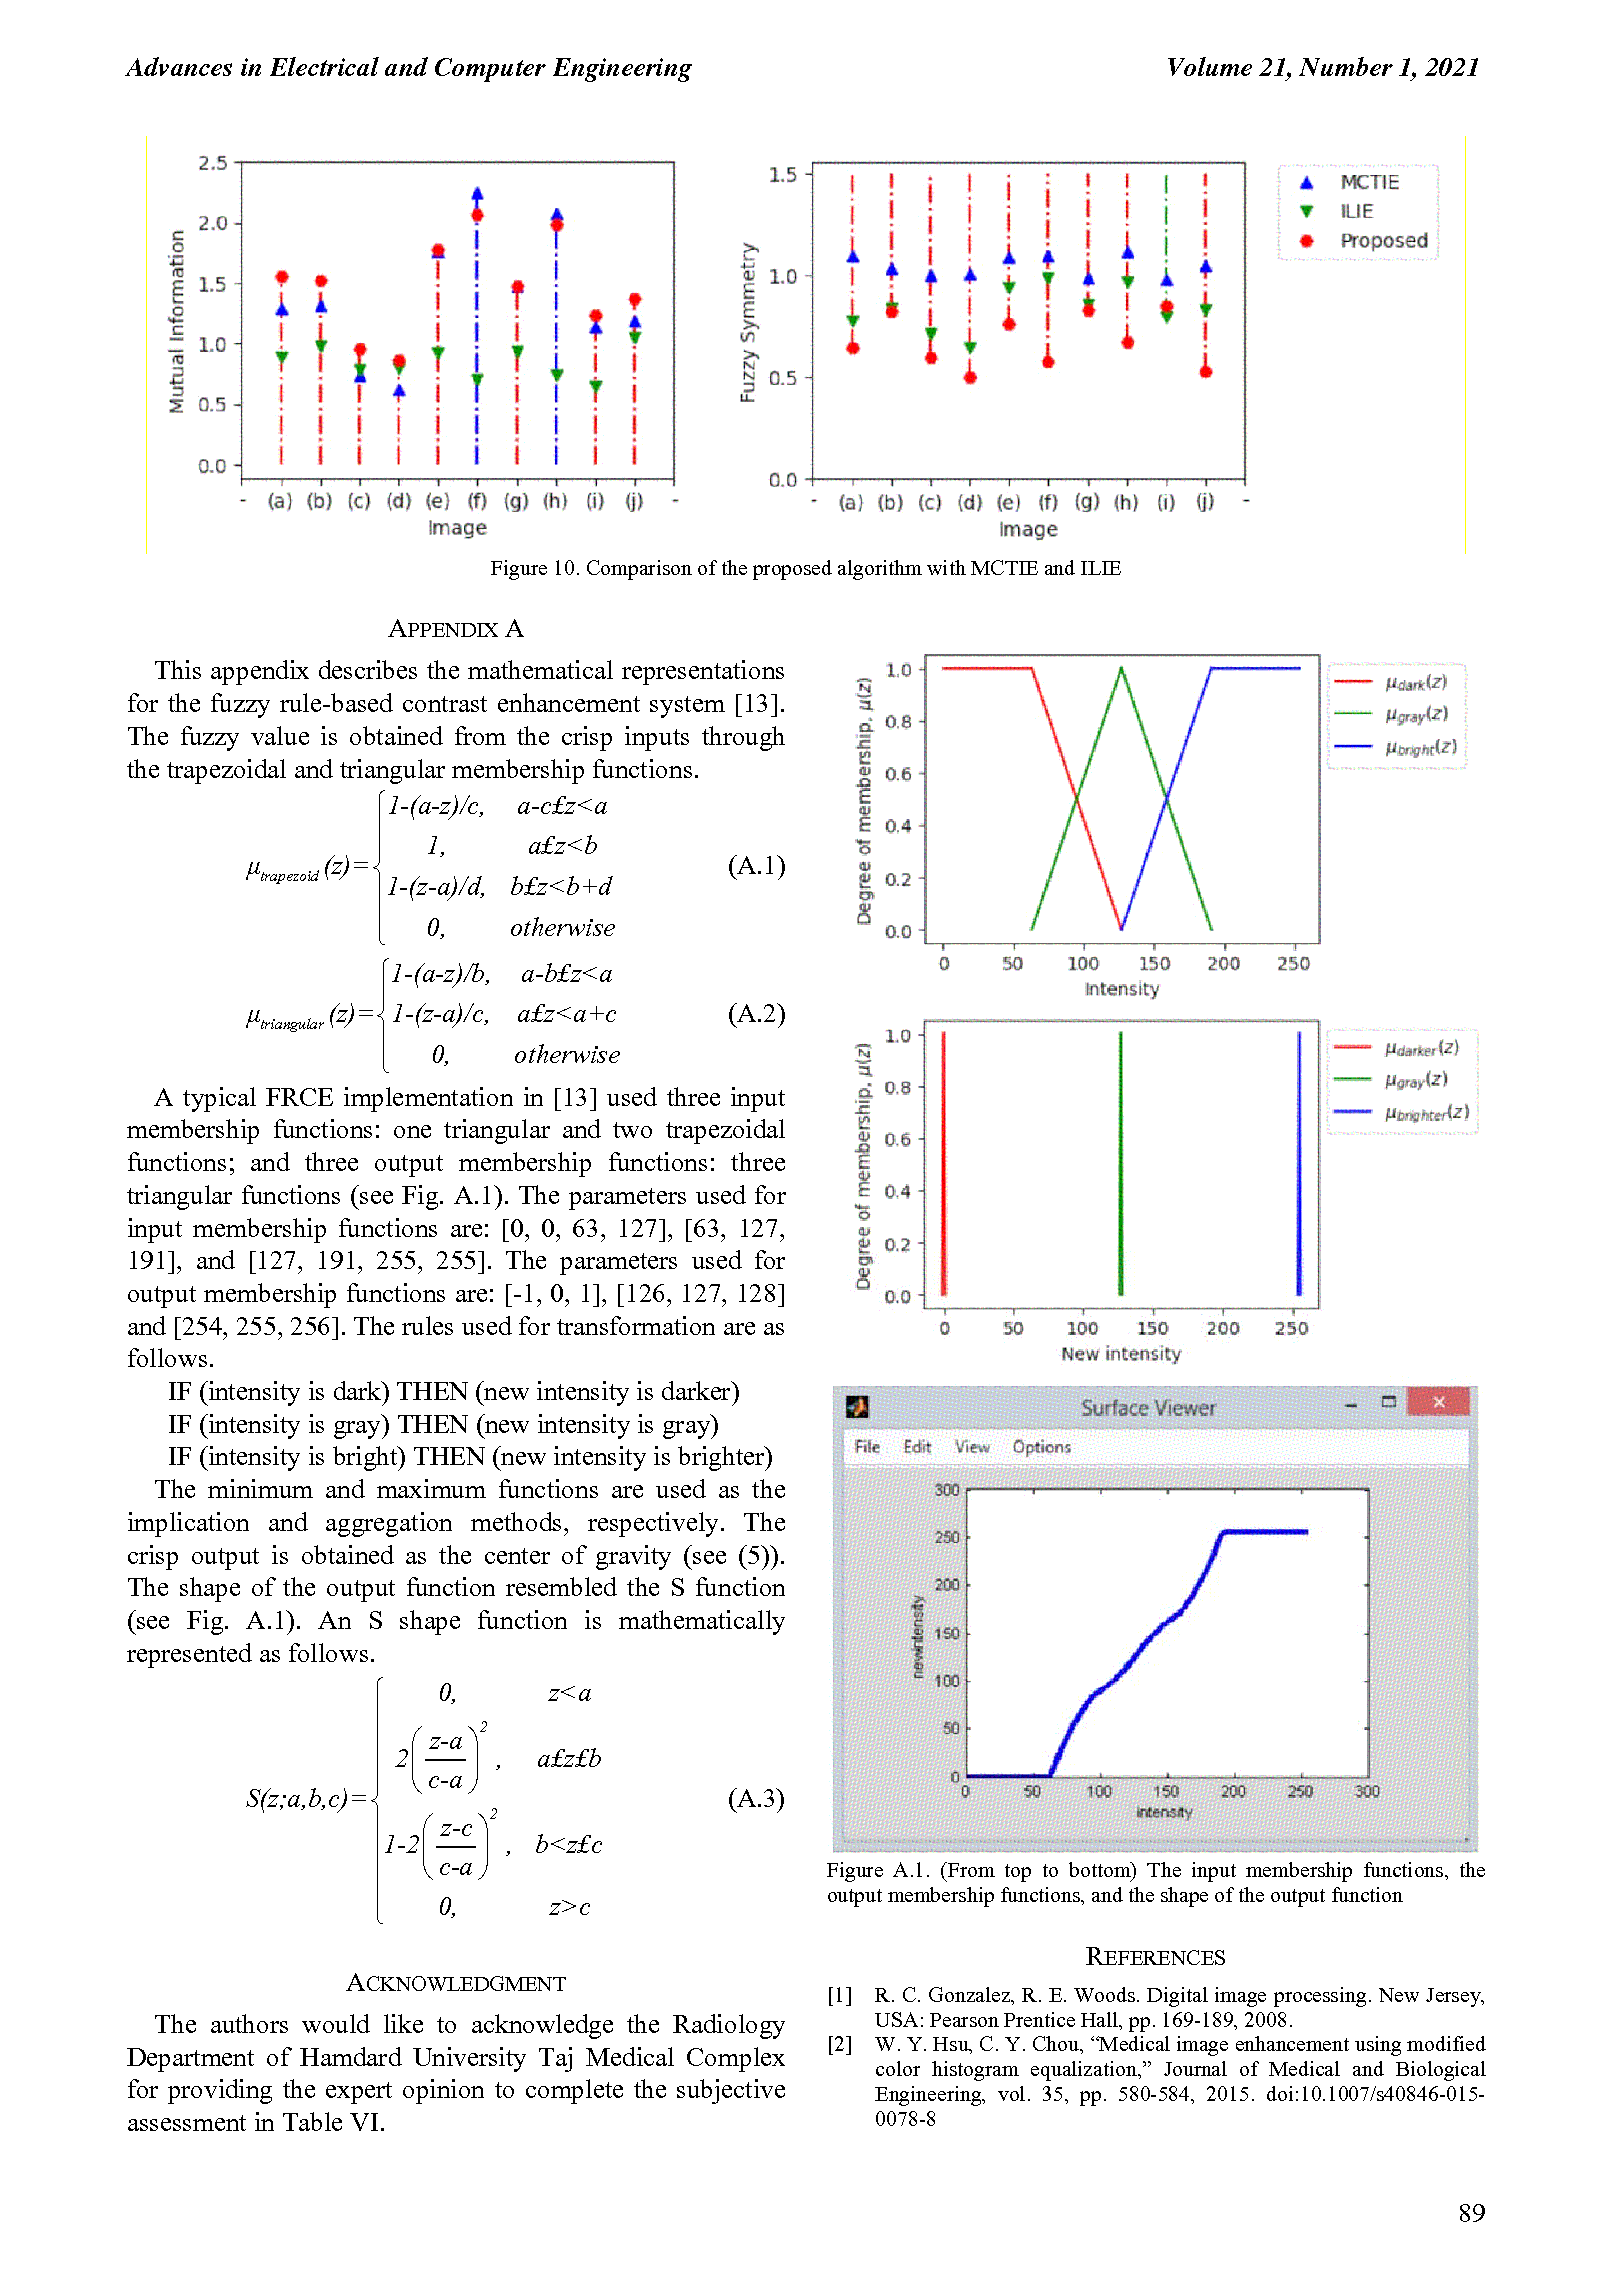 PDF Quickview for paper with DOI:10.4316/AECE.2021.01009